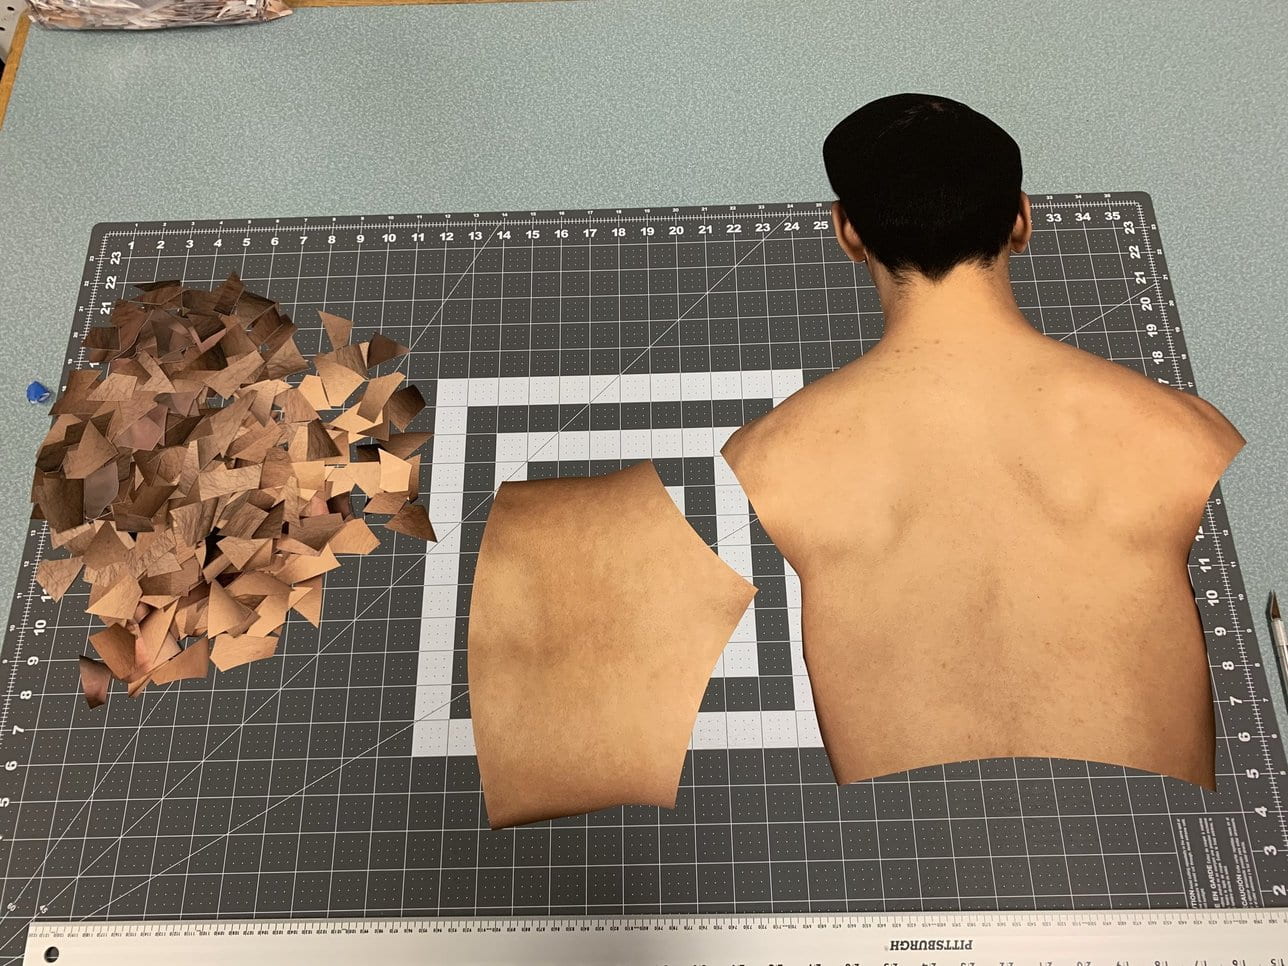 Samuel Lo, a first-year Master of Fine Arts student, will present a piece titled "Disparate Aggregation" in the "Convergence" exhibition. The above photo shows the incomplete work, which has since been finalized for the exhibit and is on display at Hopkins Hall Gallery. Credit: Samuel Lo